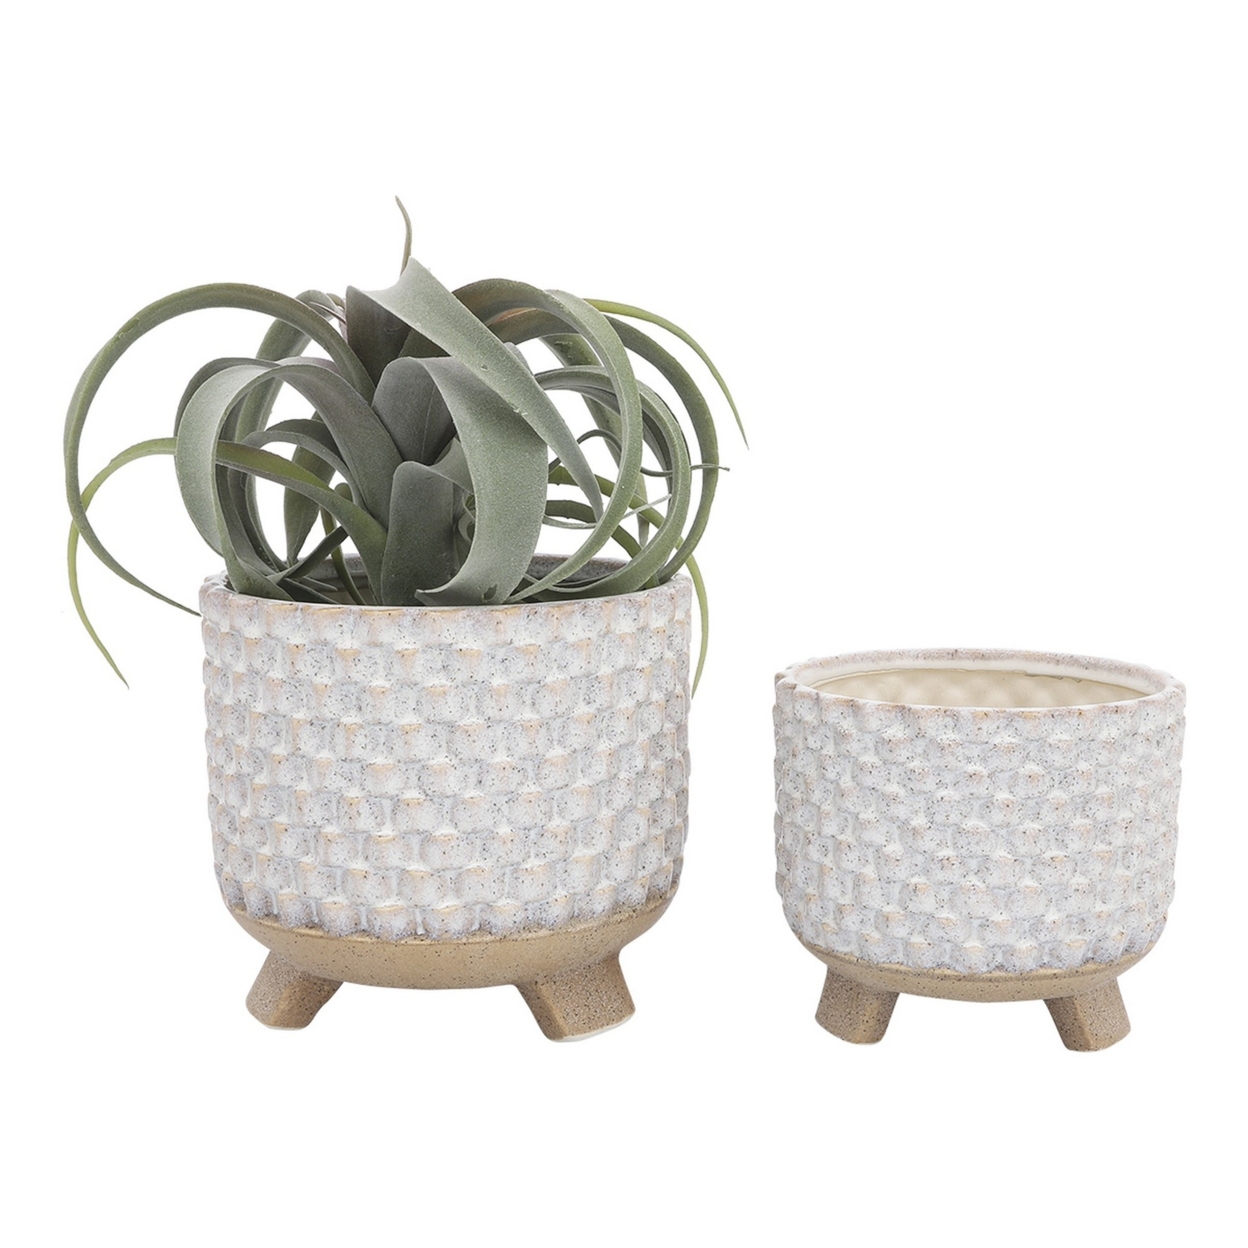 Planter With Textured Design And Footed Base, Set Of 2, Off White- Saltoro Sherpi